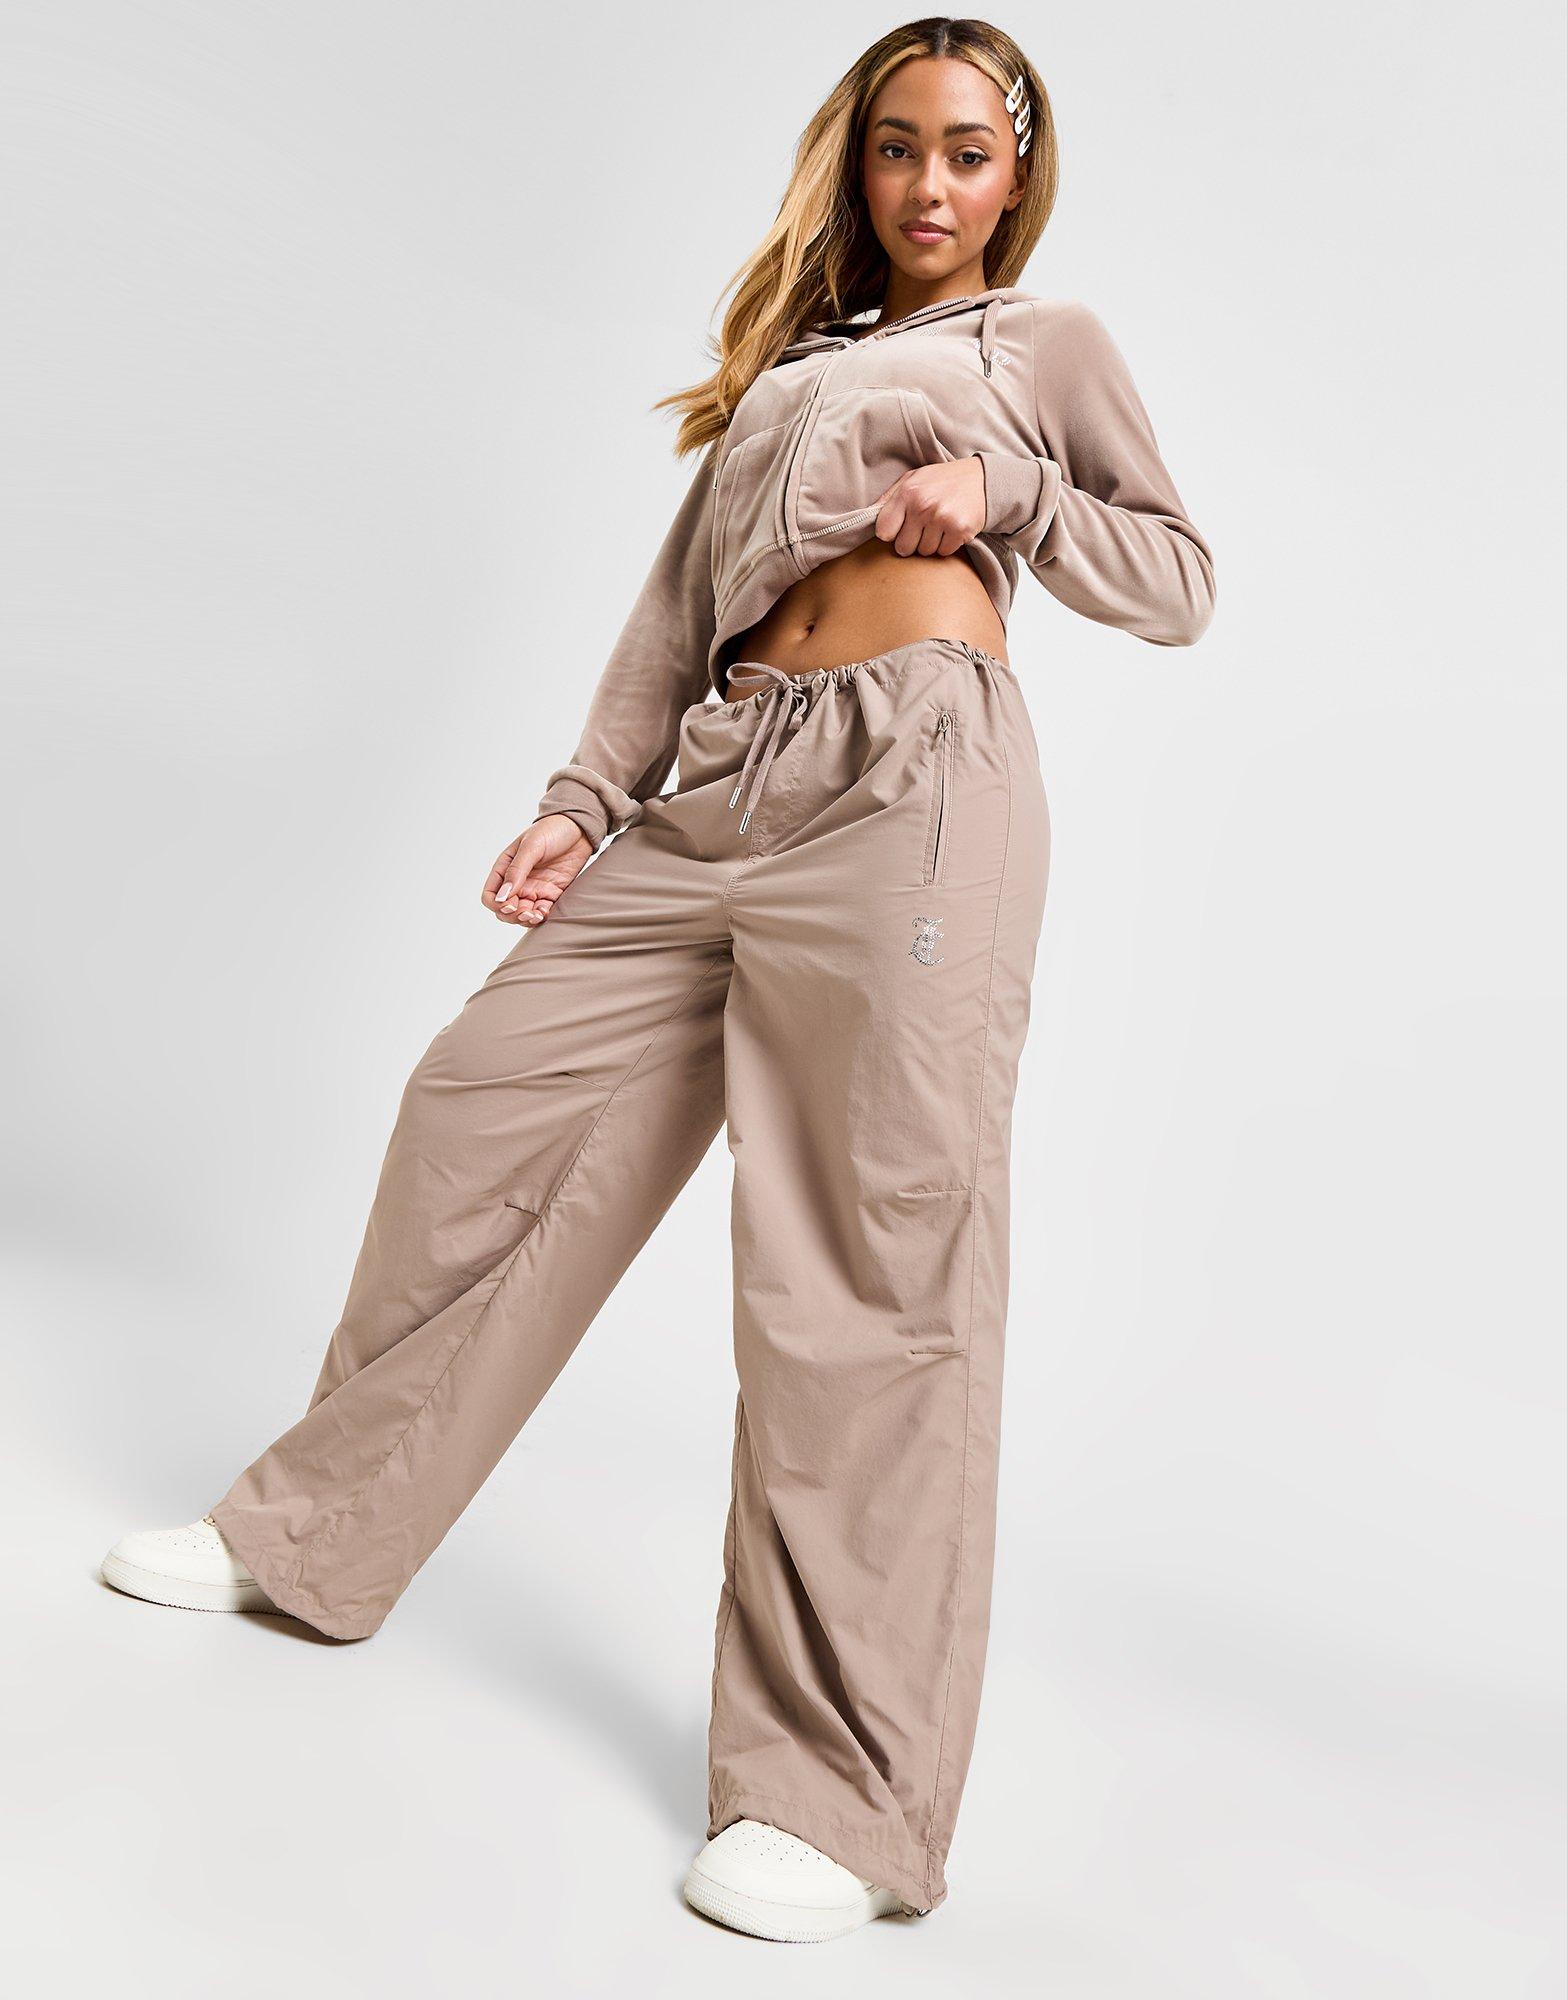 Brown JUICY COUTURE Diamante Cargo Track Pants - JD Sports